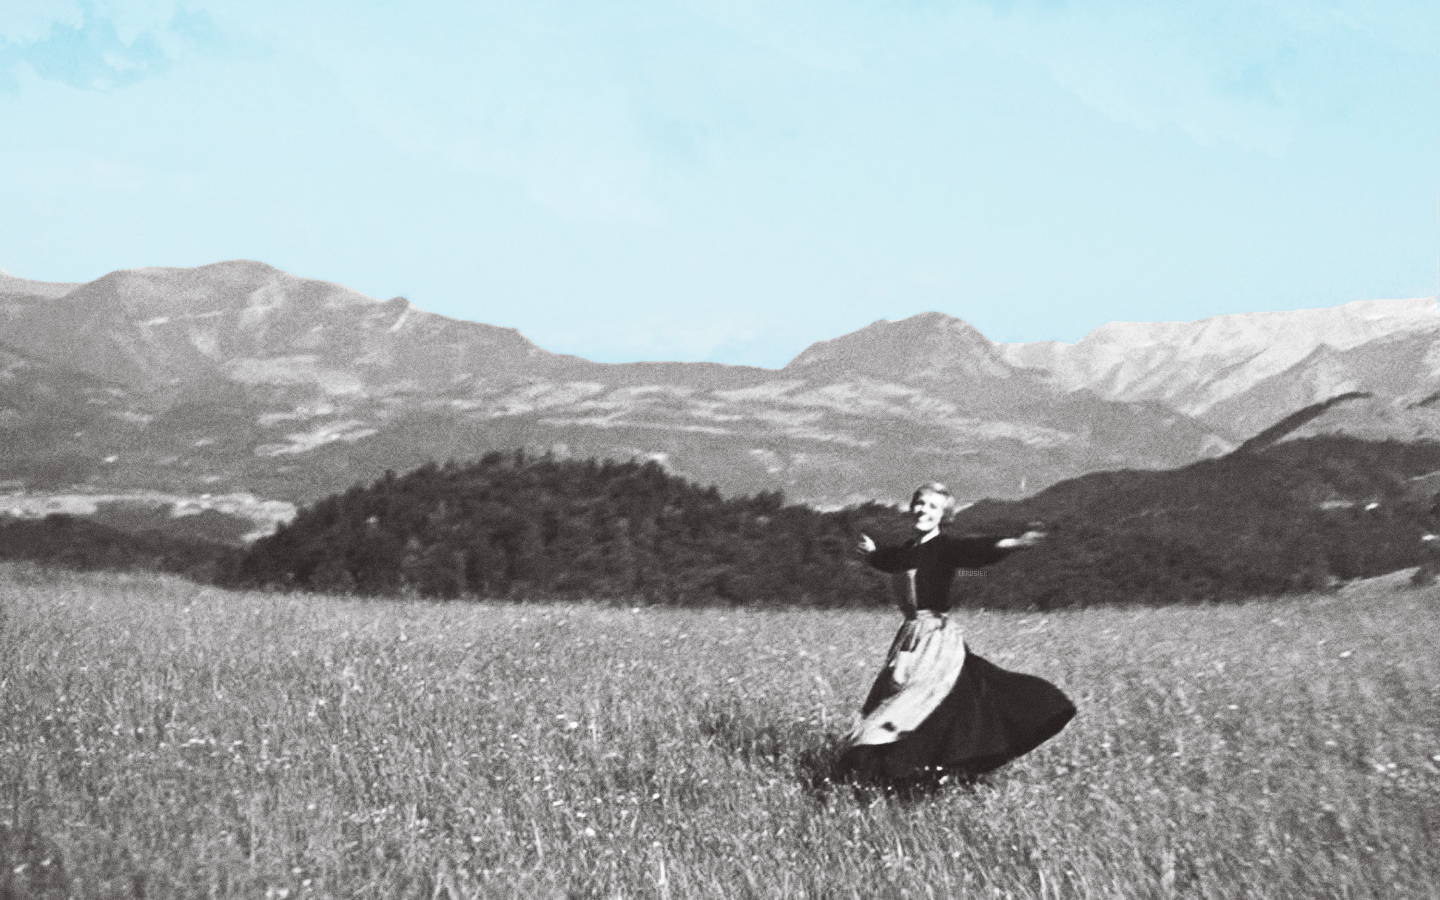 The Sound Of Music Wallpaper X